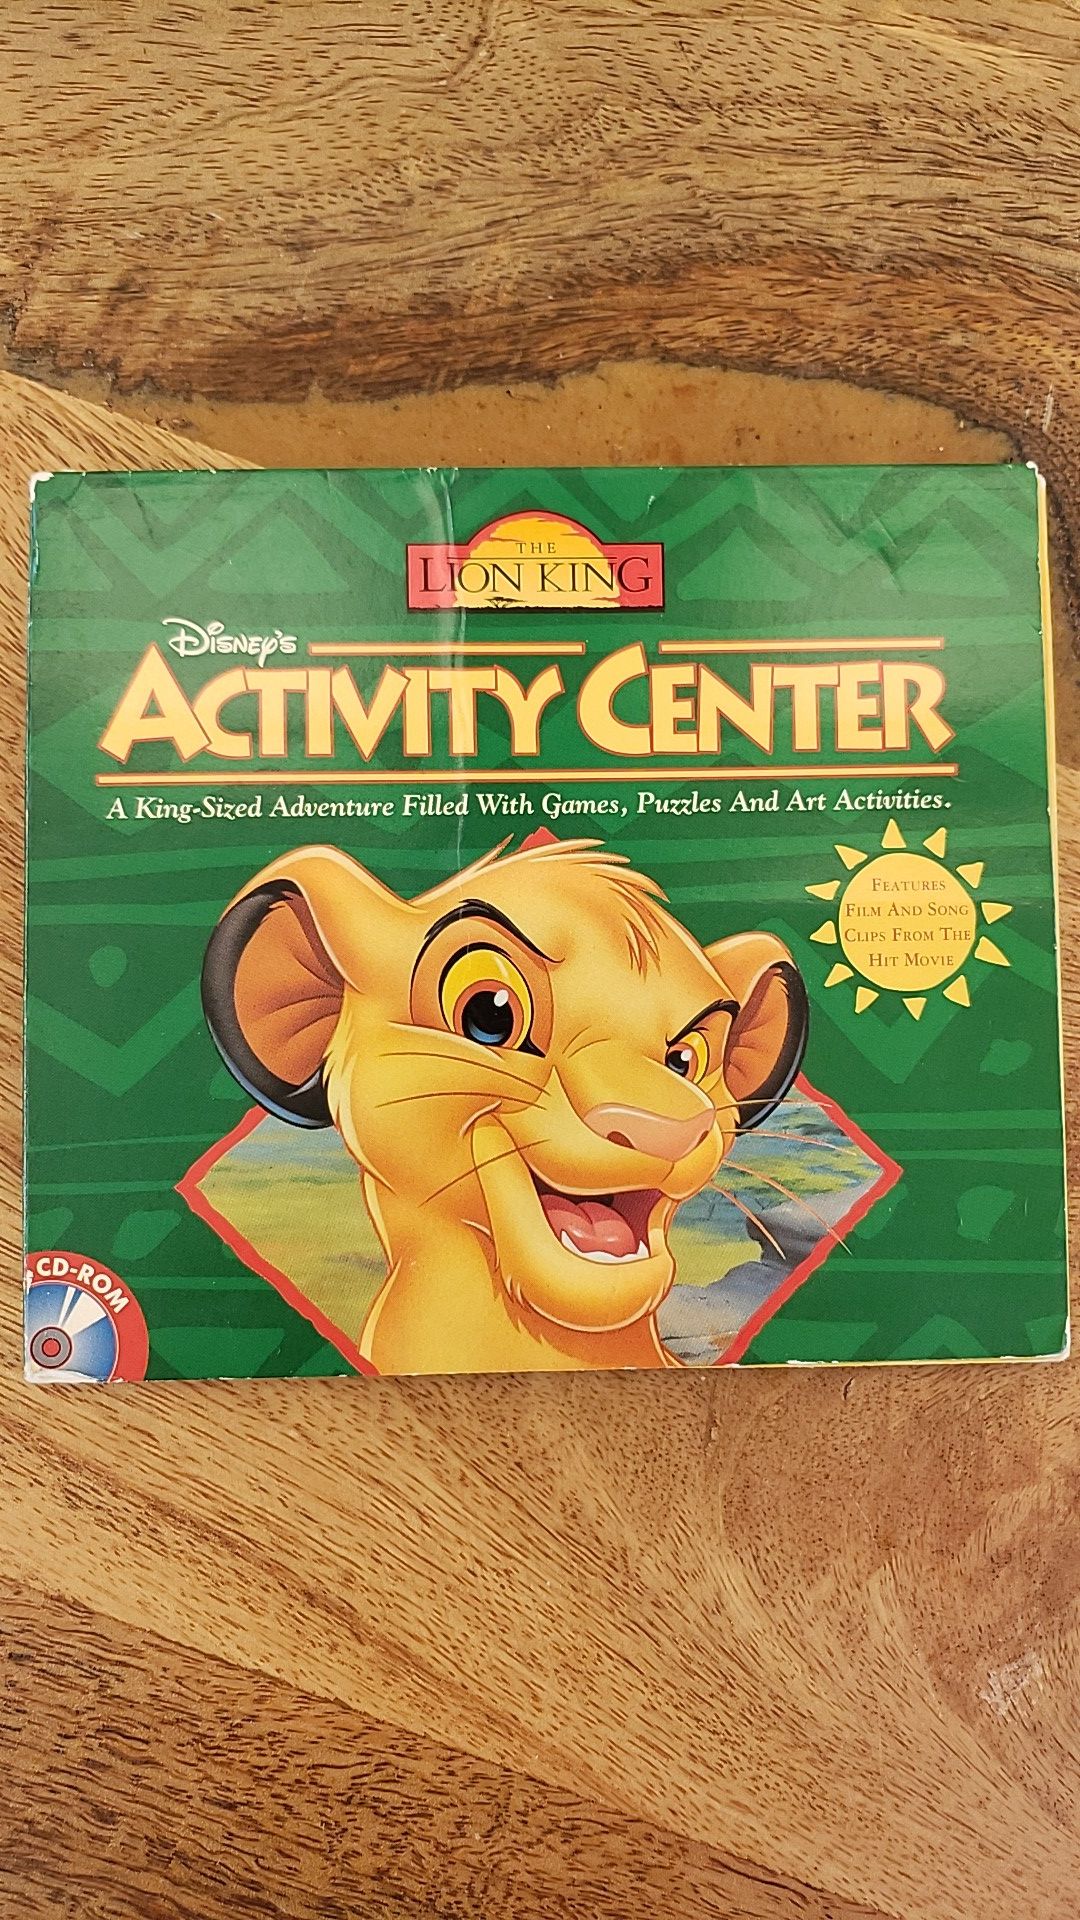 Lion King activity center for PC